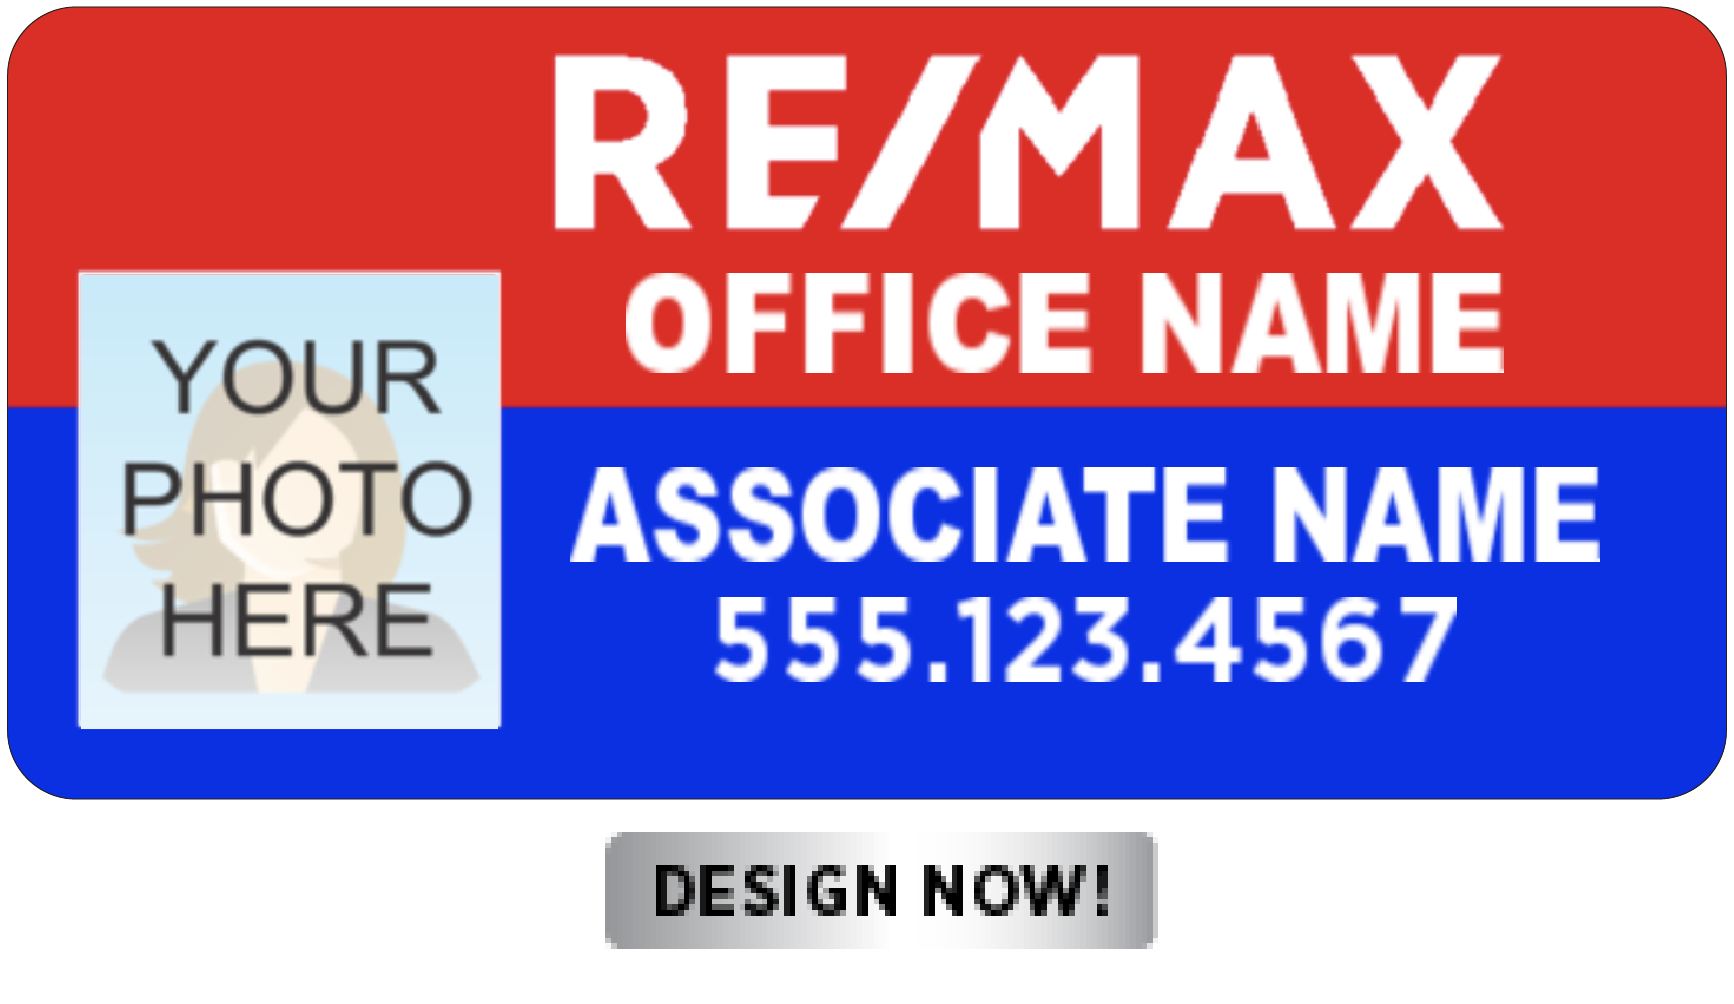 remax11x24magnetredbluewithpicthumbnails.png